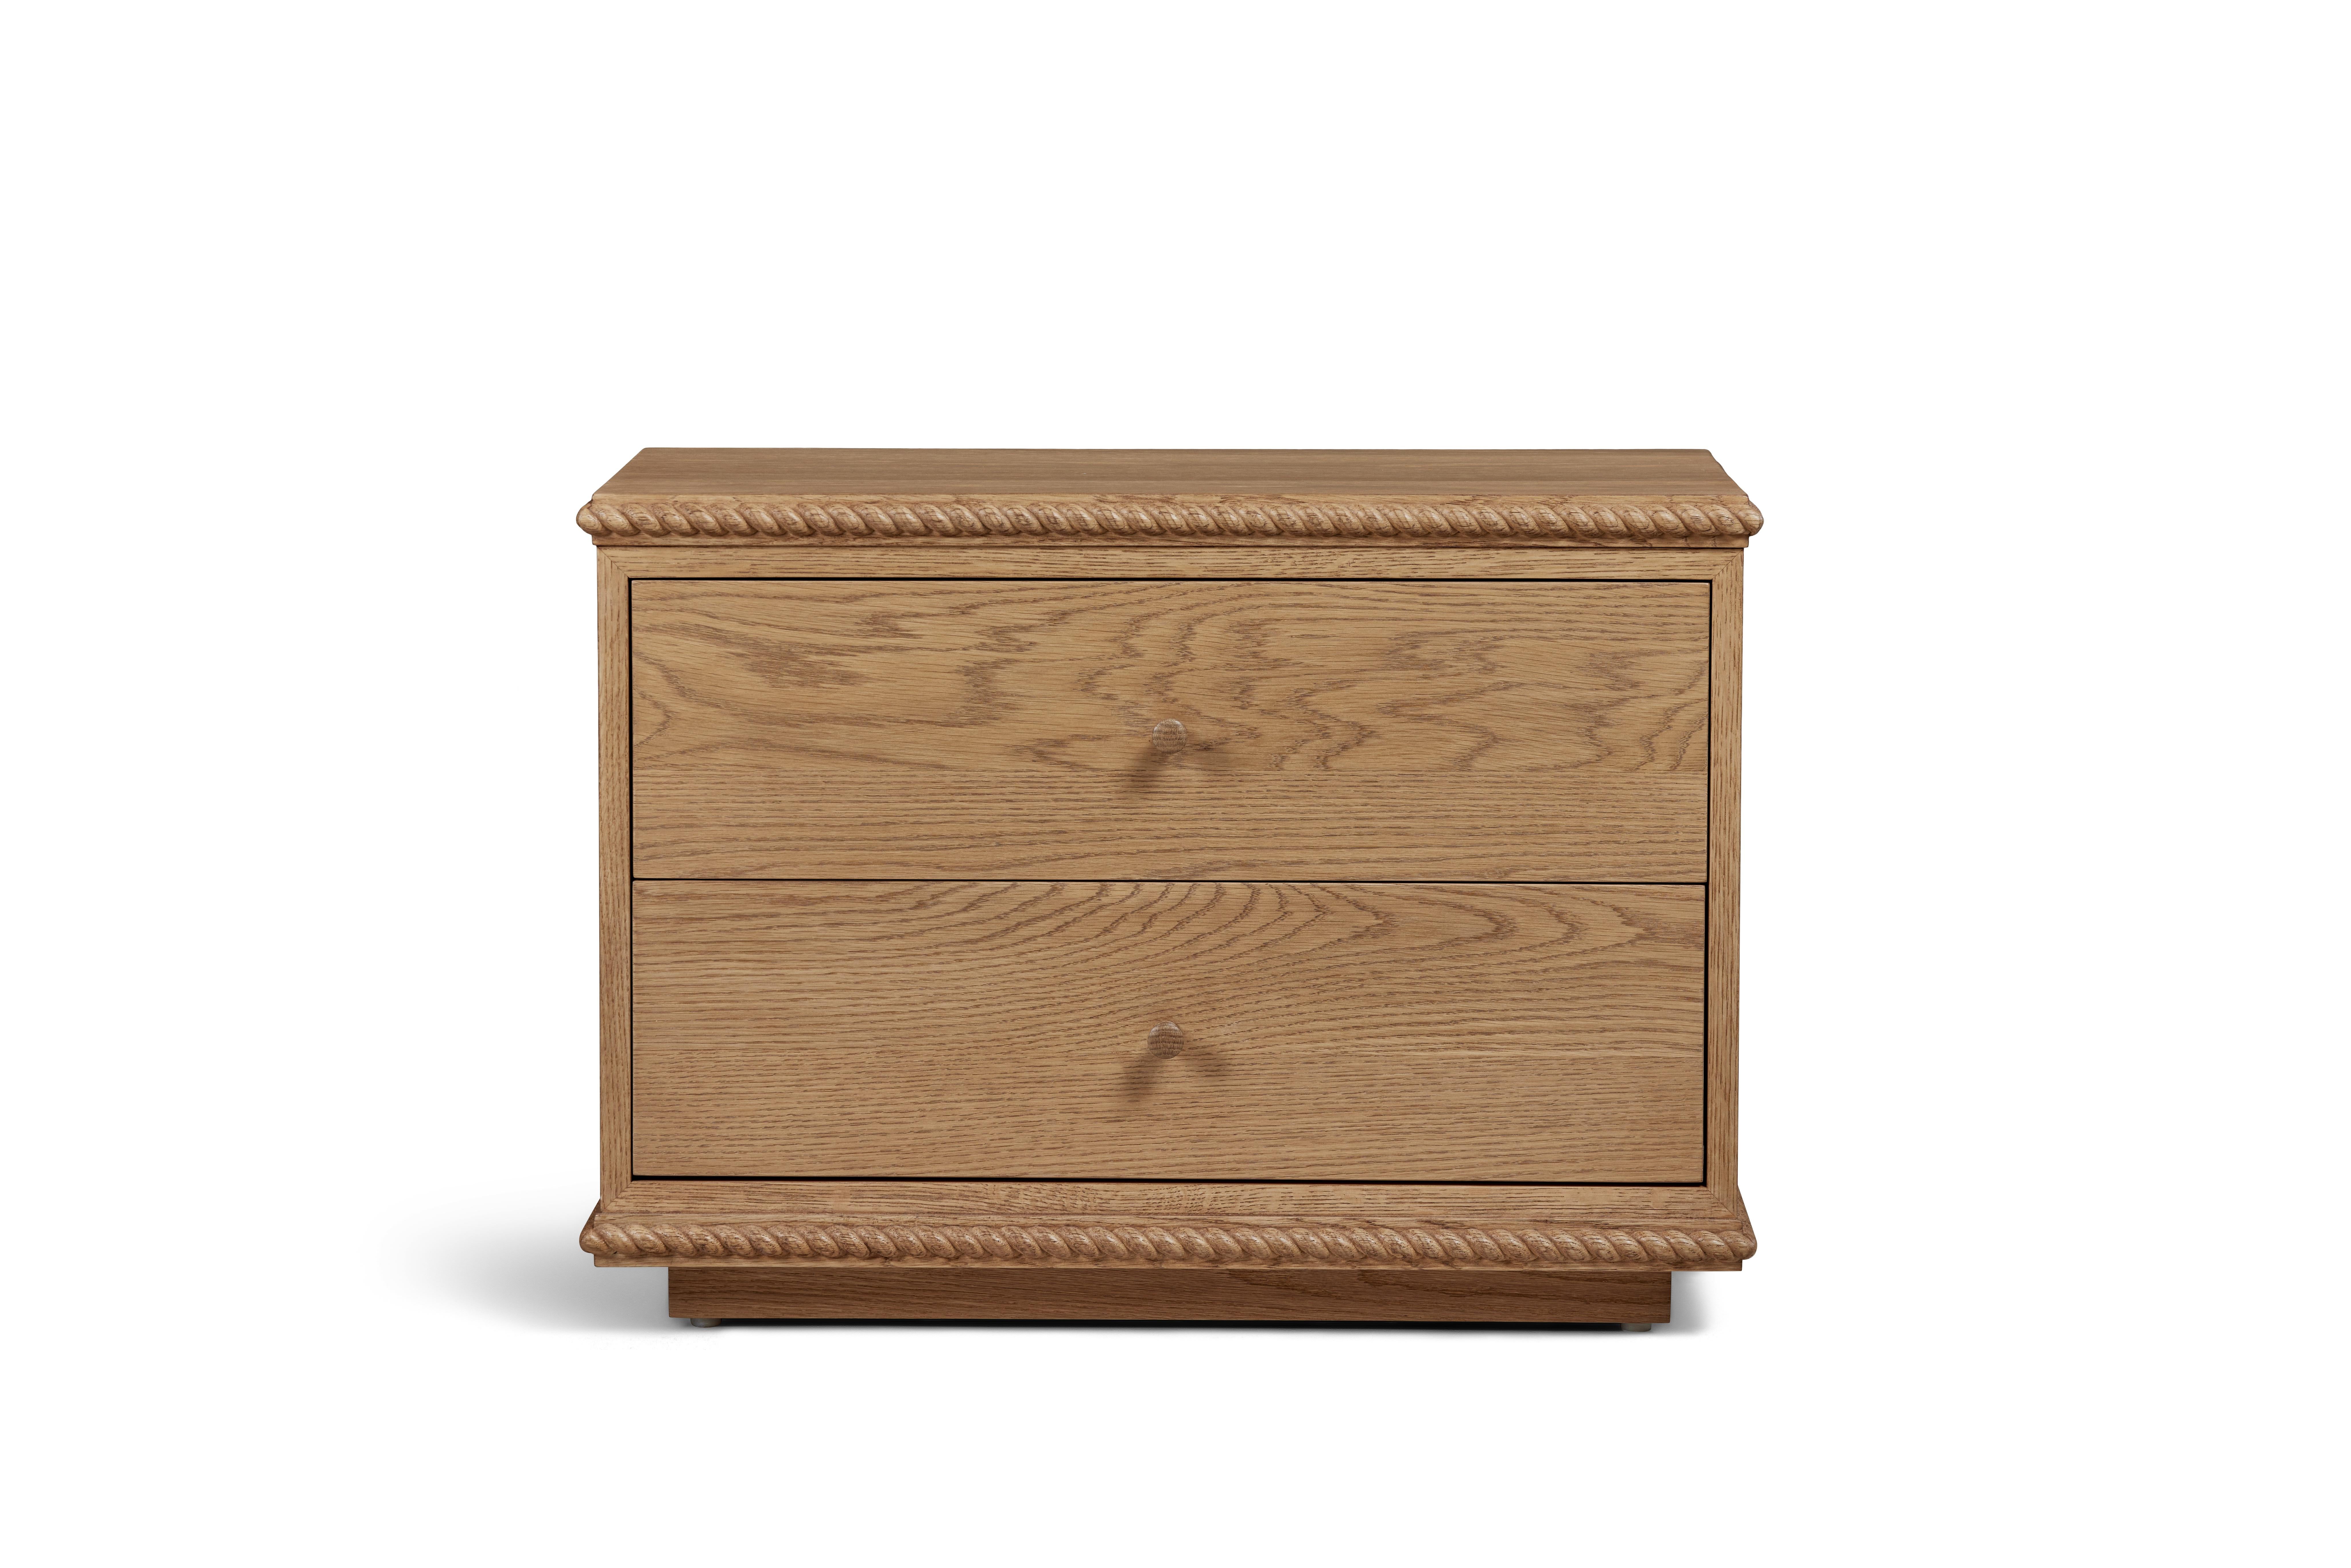 A low-profile nightstand or side table combining a classical twisted rope detail with clean-lined simplicity, featuring two drawers with dovetail joinery and soft-close glides. Inquire for customizations. 

Our Rey Collection conjures memories of a